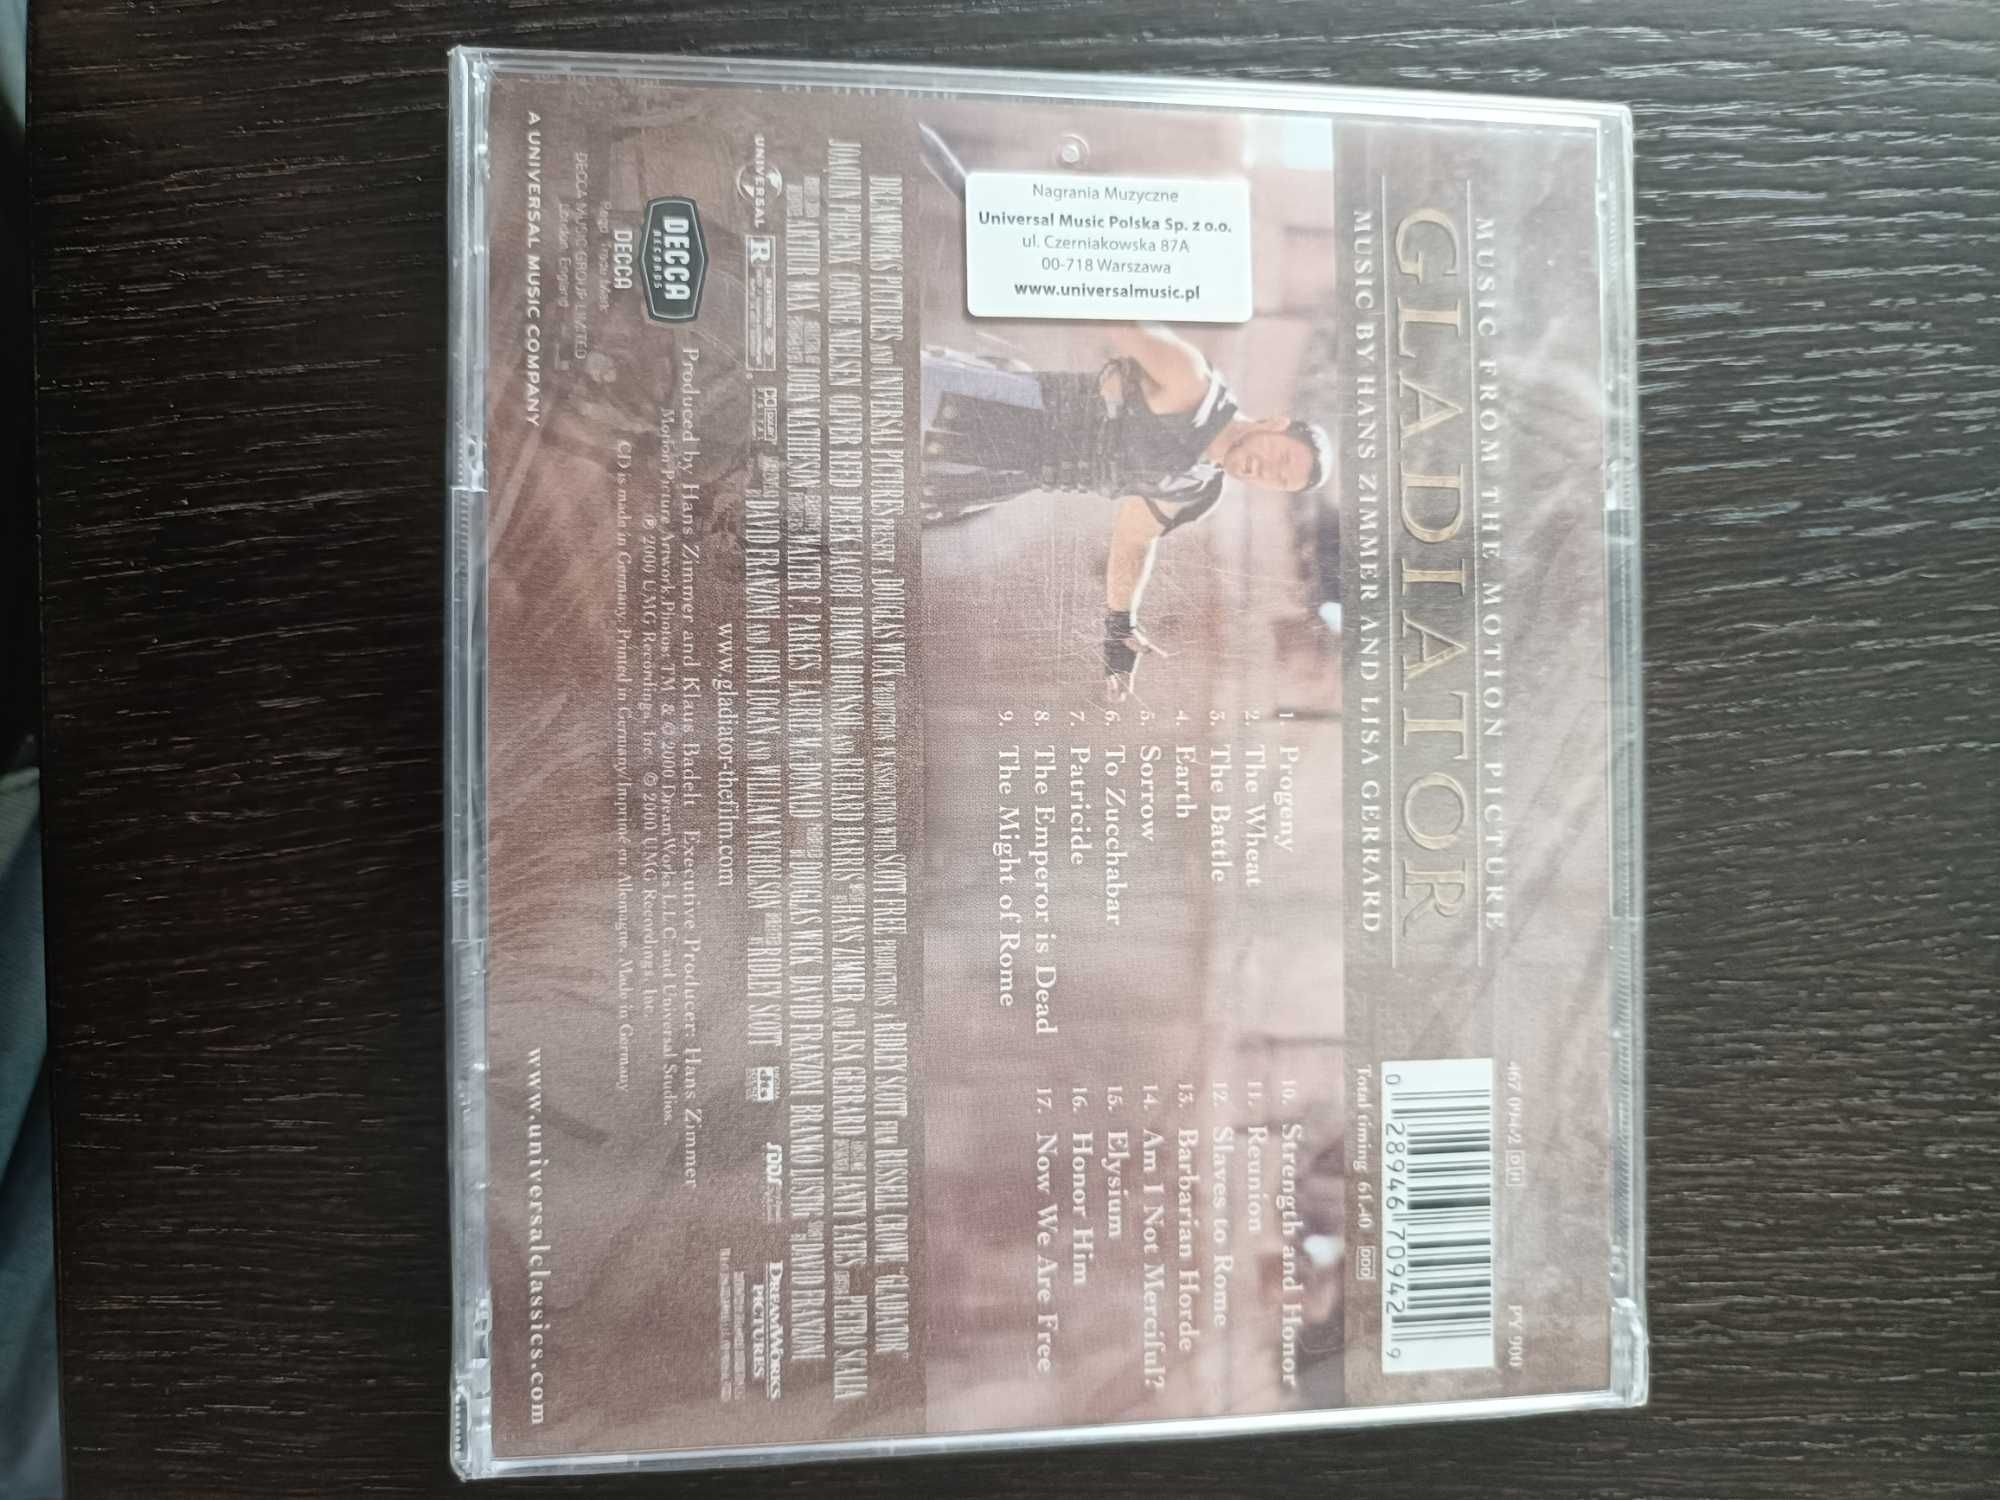 Gladiator music grom the motion picture cd